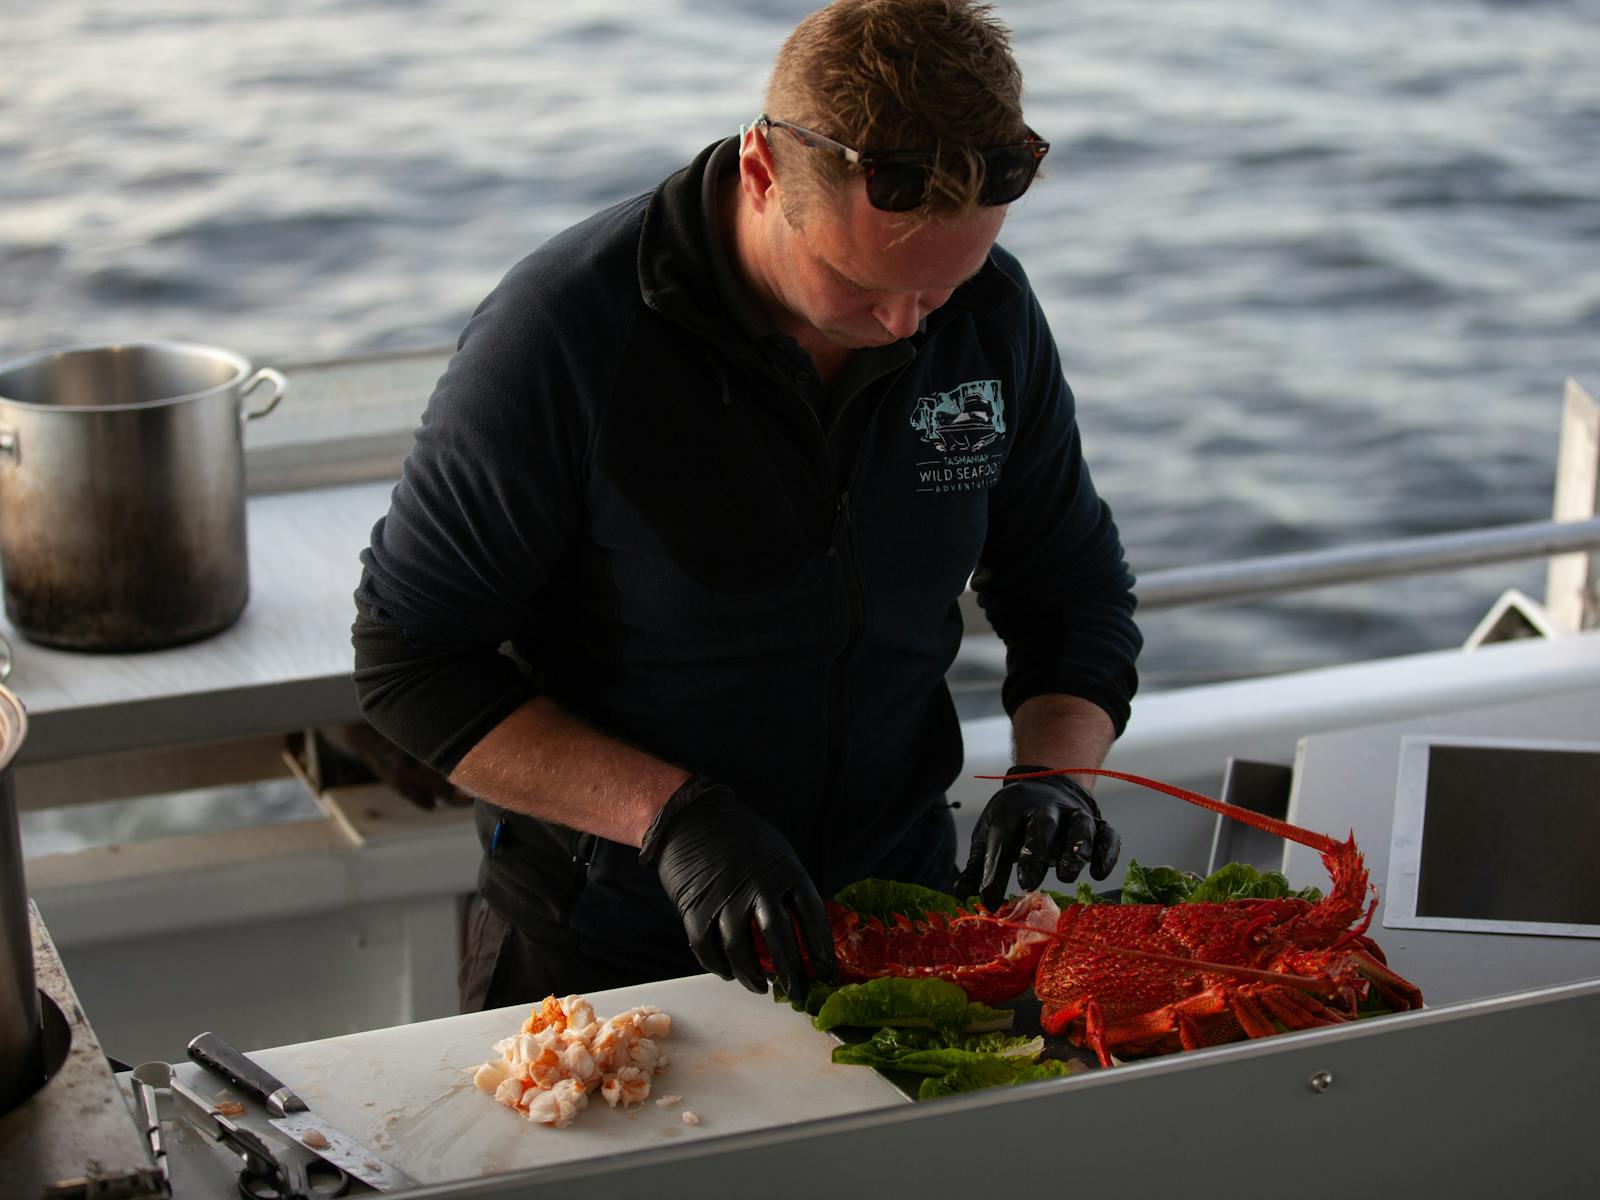 Shane prepares a recently caught Tasmanian rock lobster at the rear of the vessel with ocean behind.